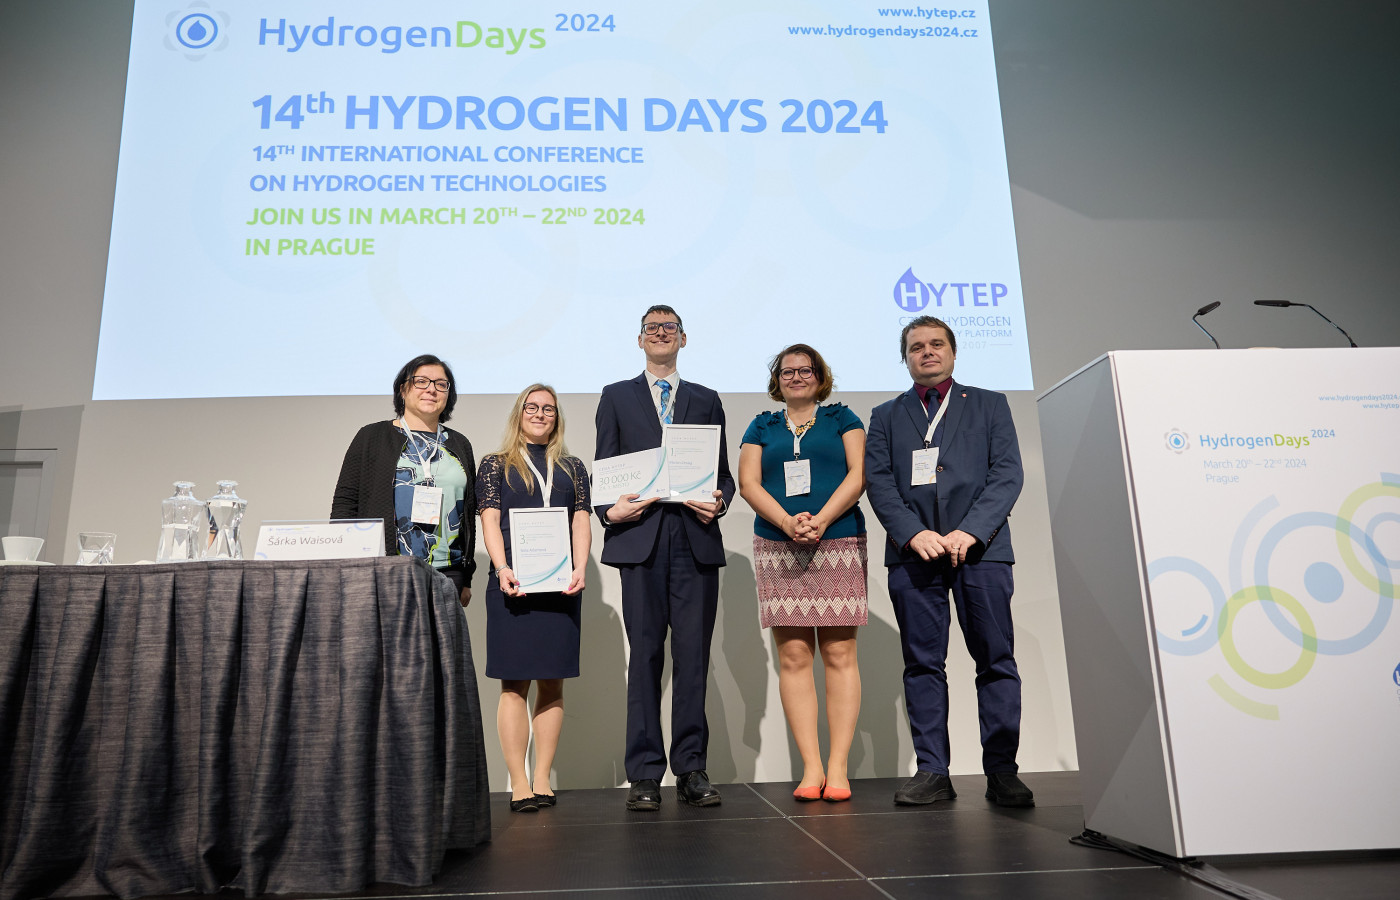 Martin Orság won the HYTEP prize for the best diploma thesis in the field of hygrogen technologies